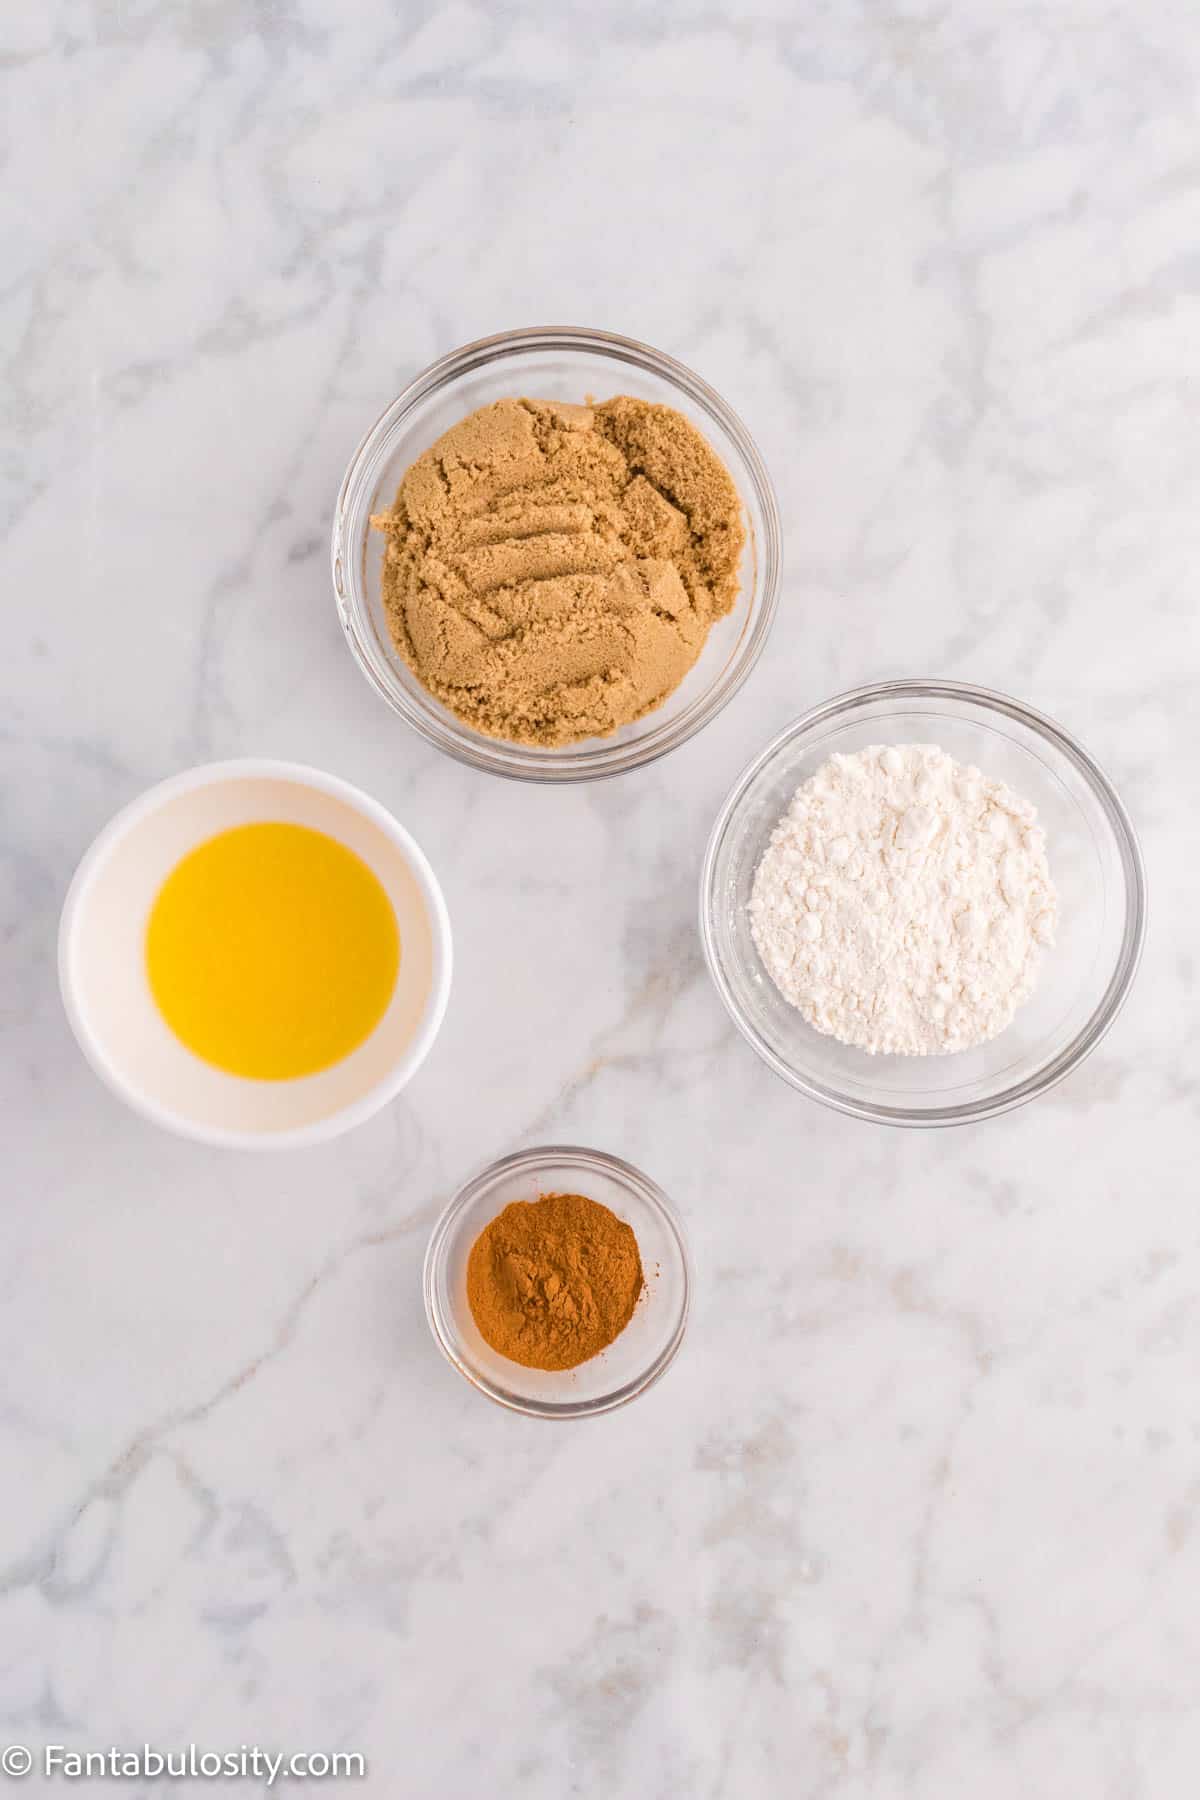 The ingredients for the cinnamon crumb topping for Cinnamon Coffee Cake are displayed in small bowls on a marble surface